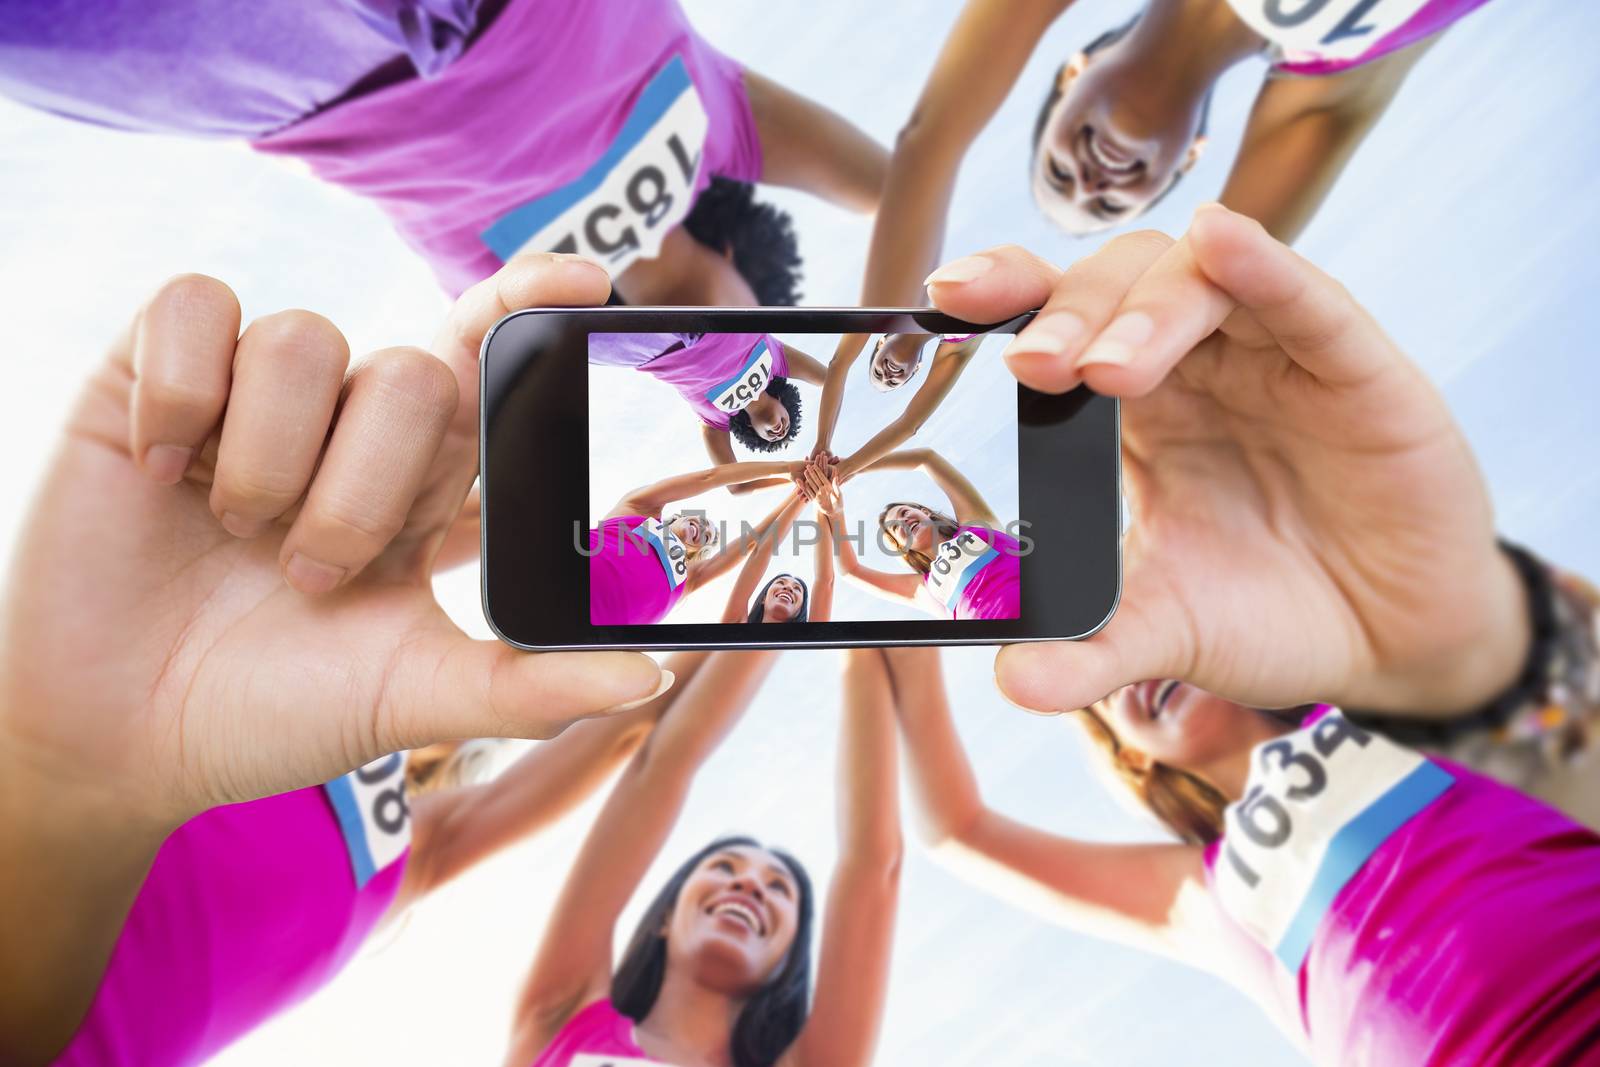 Hand holding smartphone showing against five smiling runners supporting breast cancer marathon